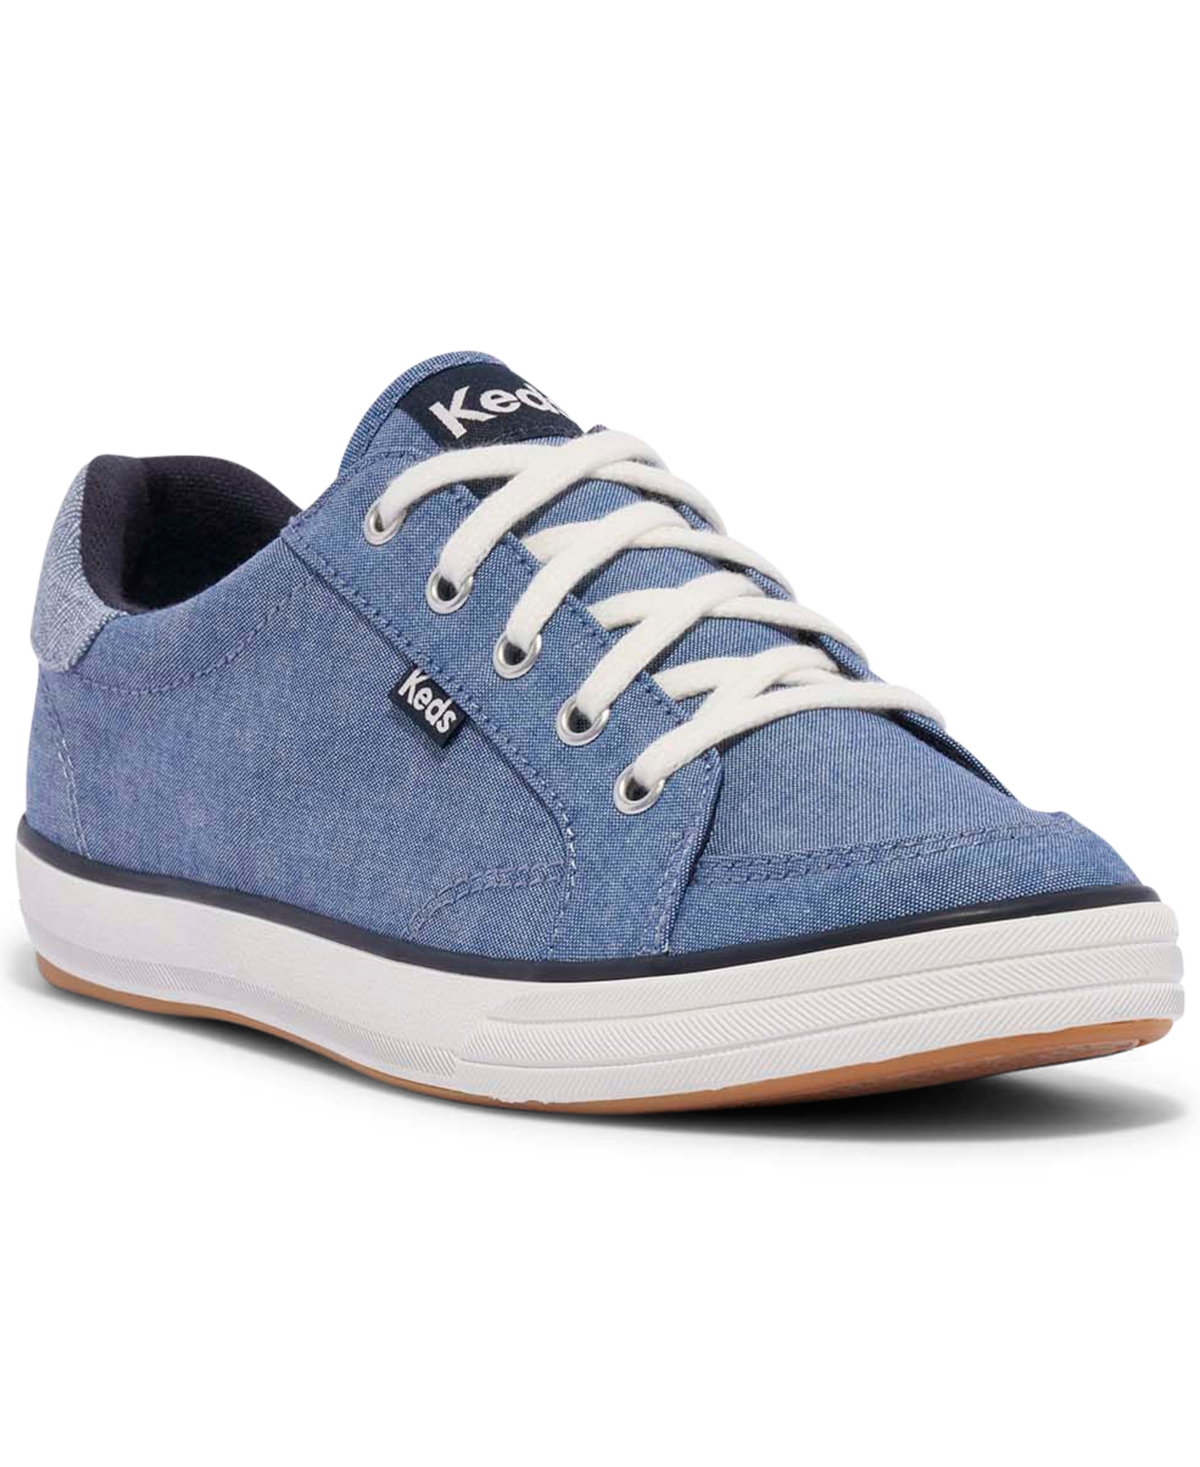 Women's Center Iii Canvas Casual Sneakers from Finish Line - Navy